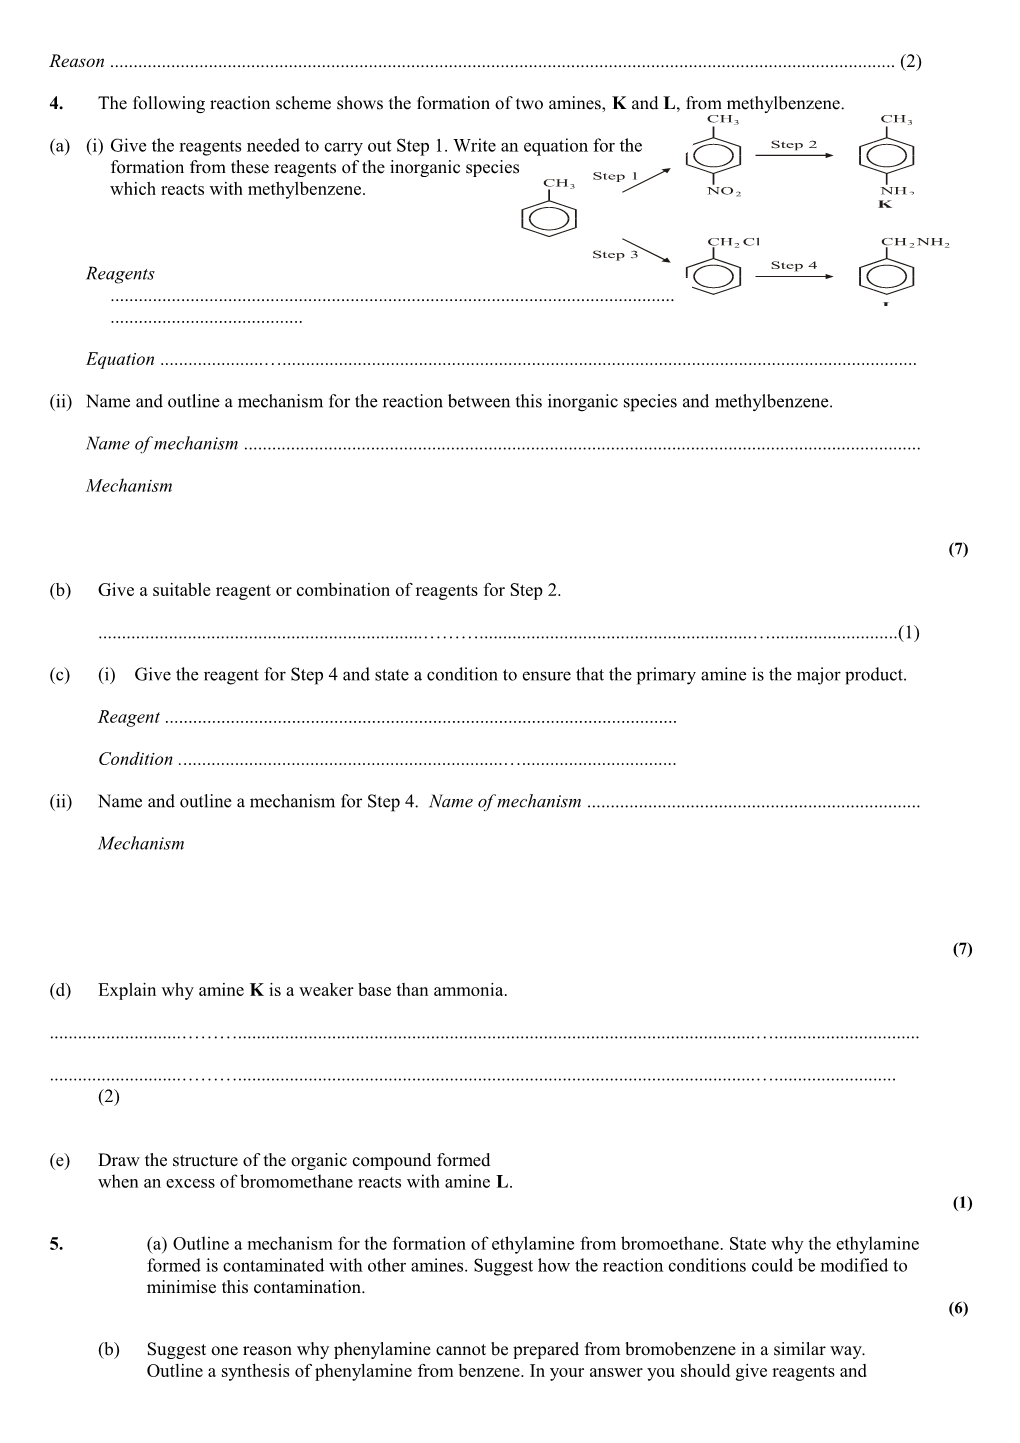 1.Cumene, C6H5CH(CH3)2, Is the Major Organic Product Obtained When Benzene and Propene